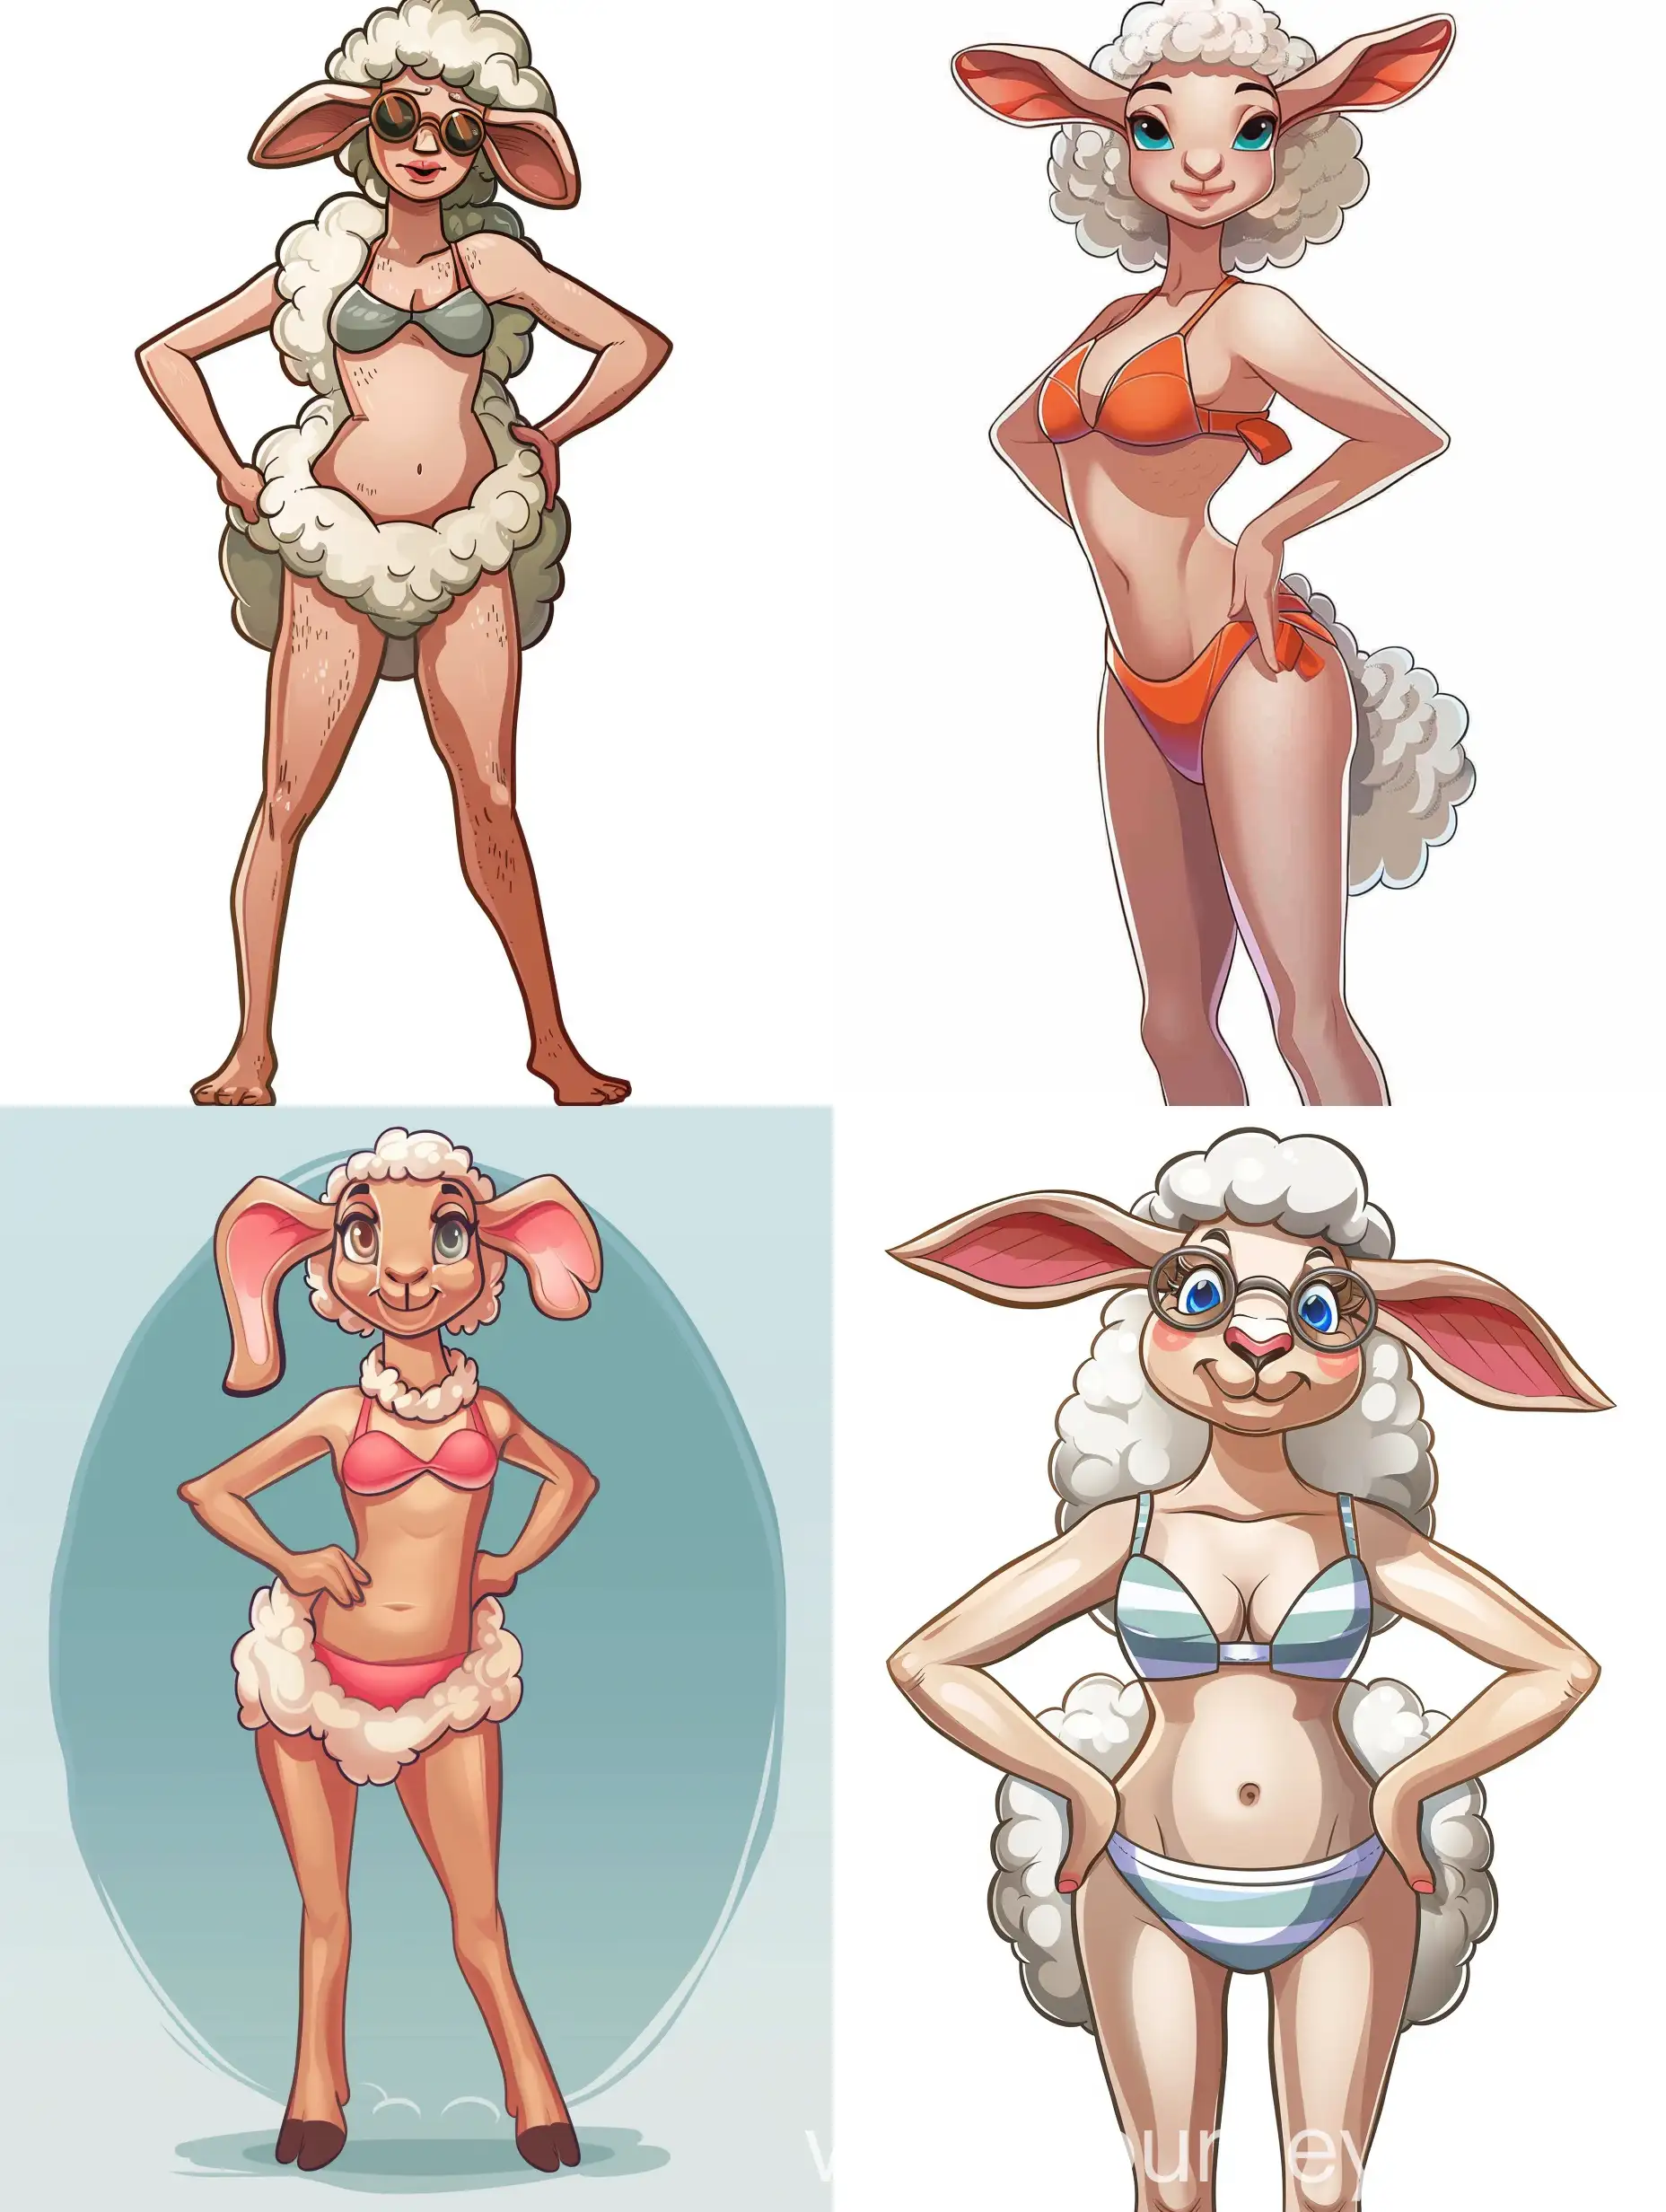 Cheerful-Cartoon-Adult-Sheep-in-Swimsuit-Pose